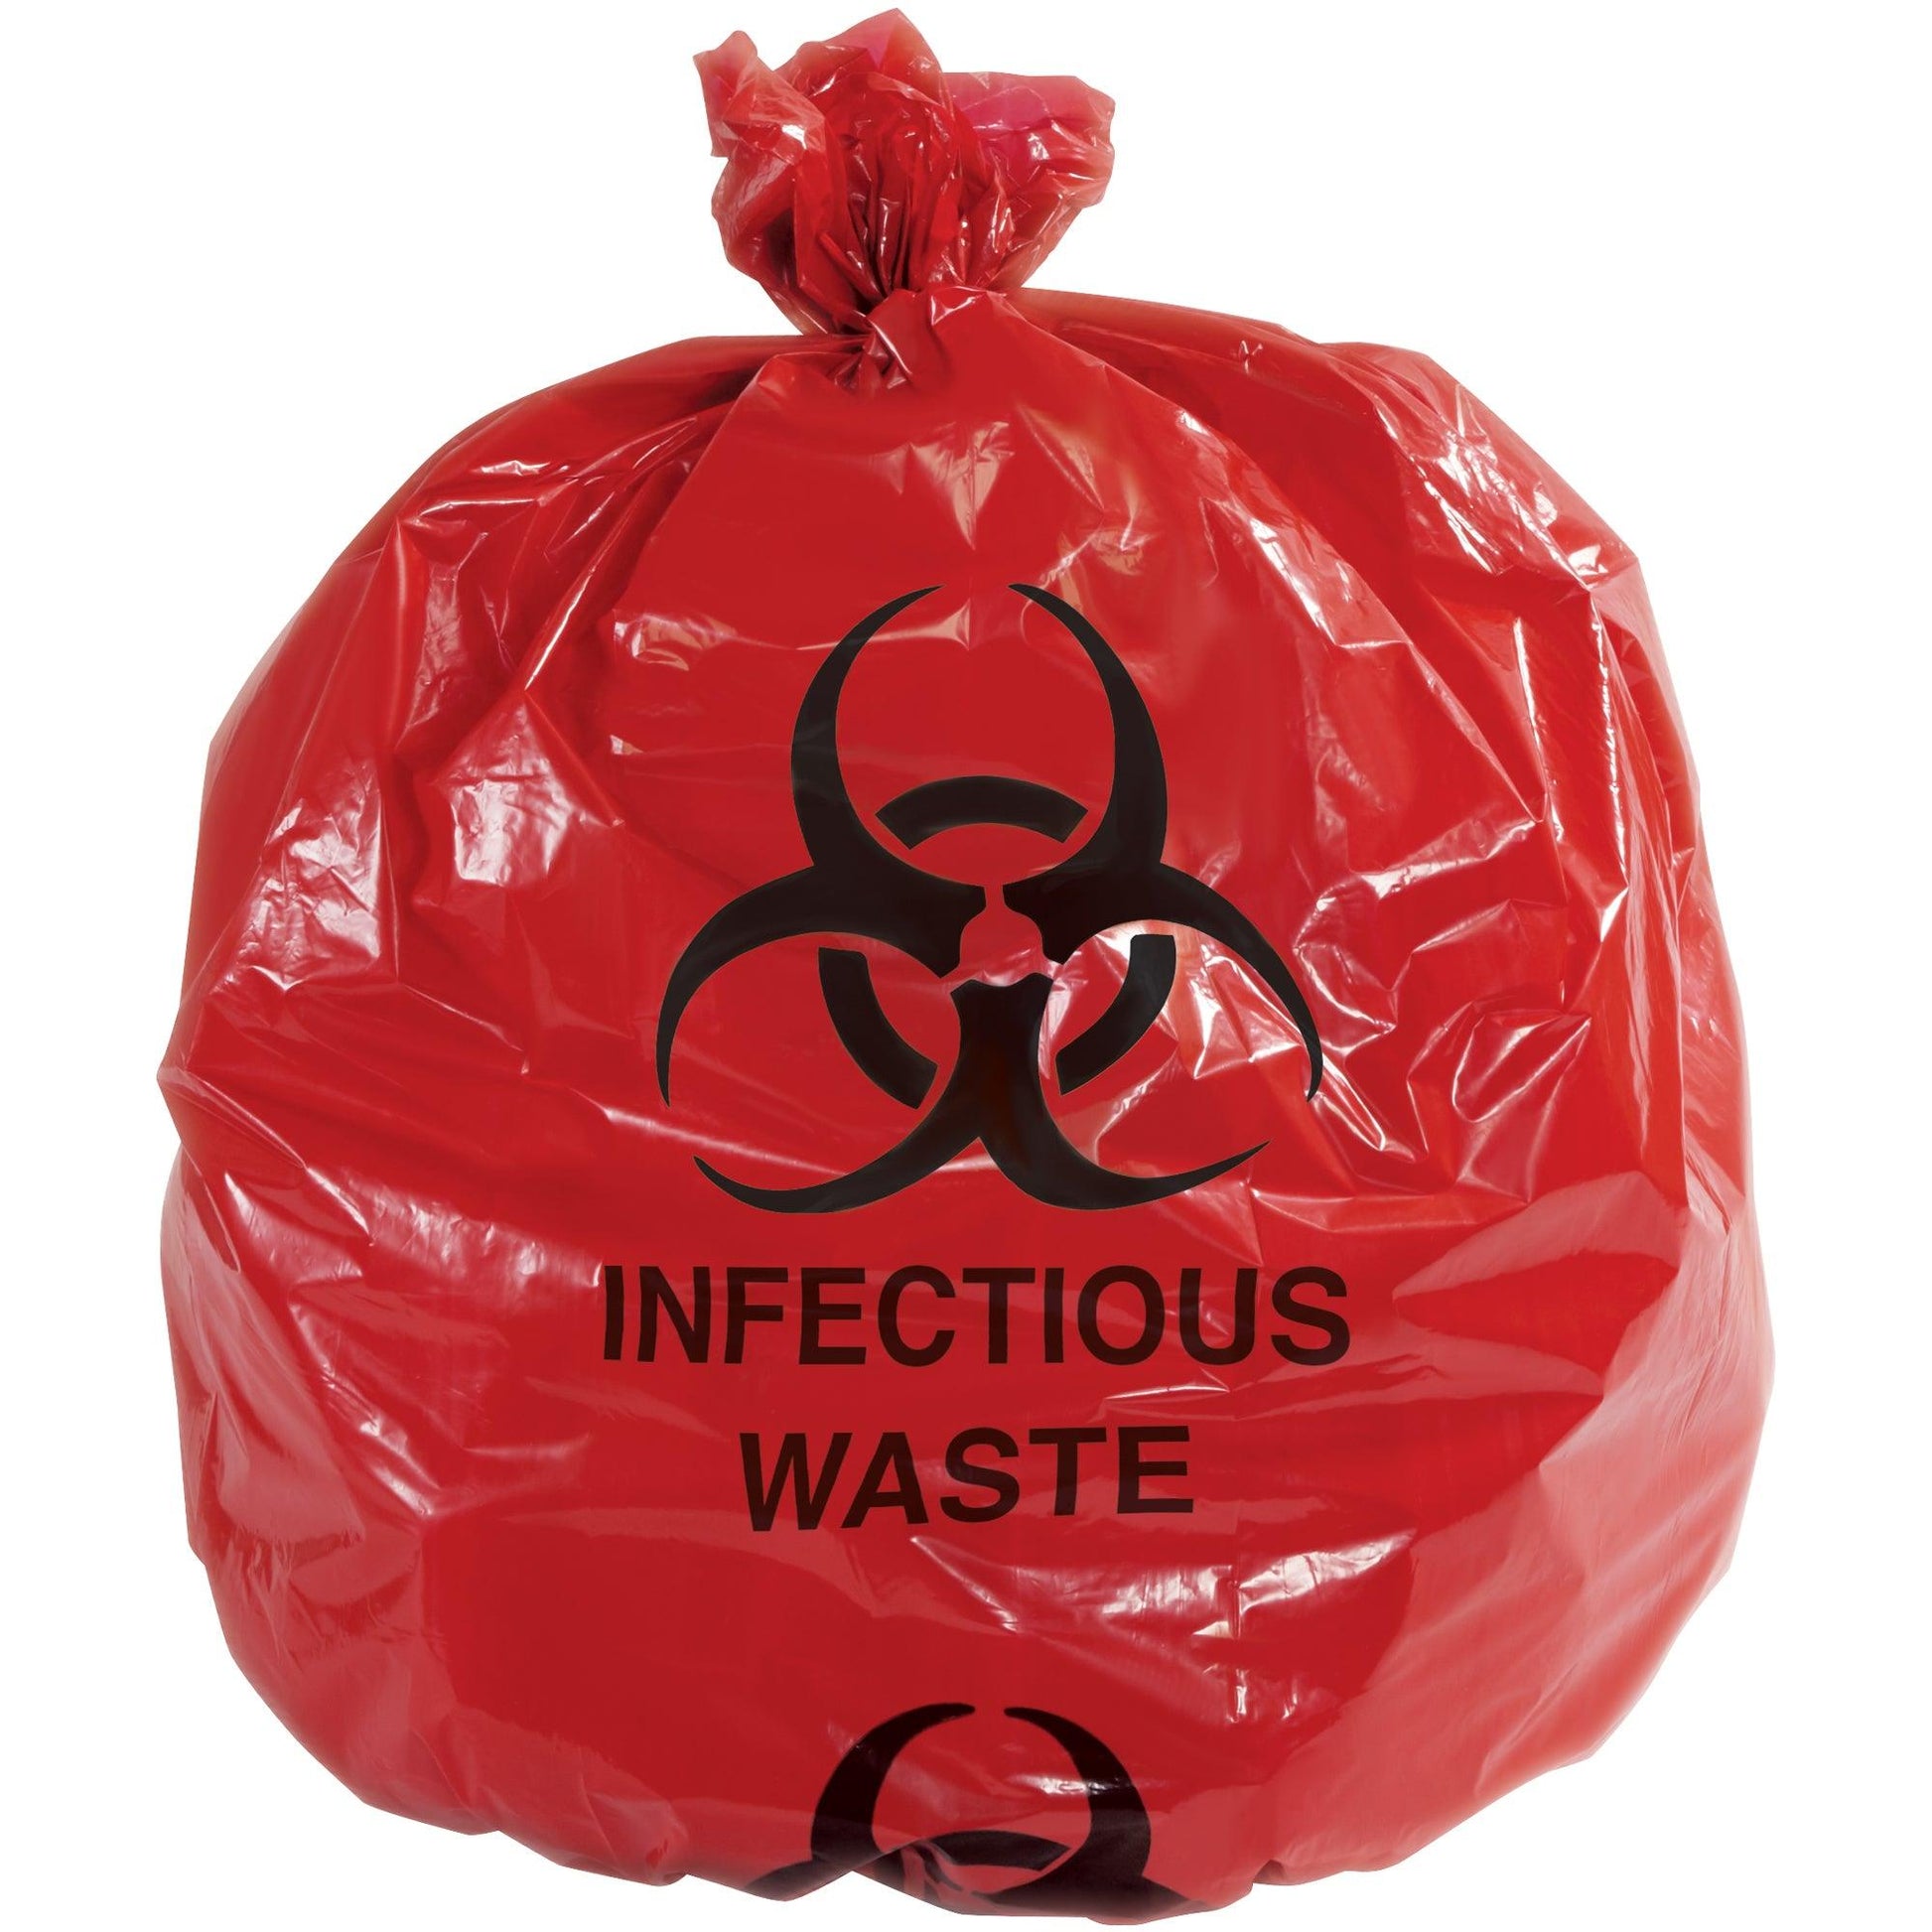 Infectious Waste Trash Liner - Red with "Infectious Waste" Print, 30 Gallon, 1.1 Mil. - CL9001